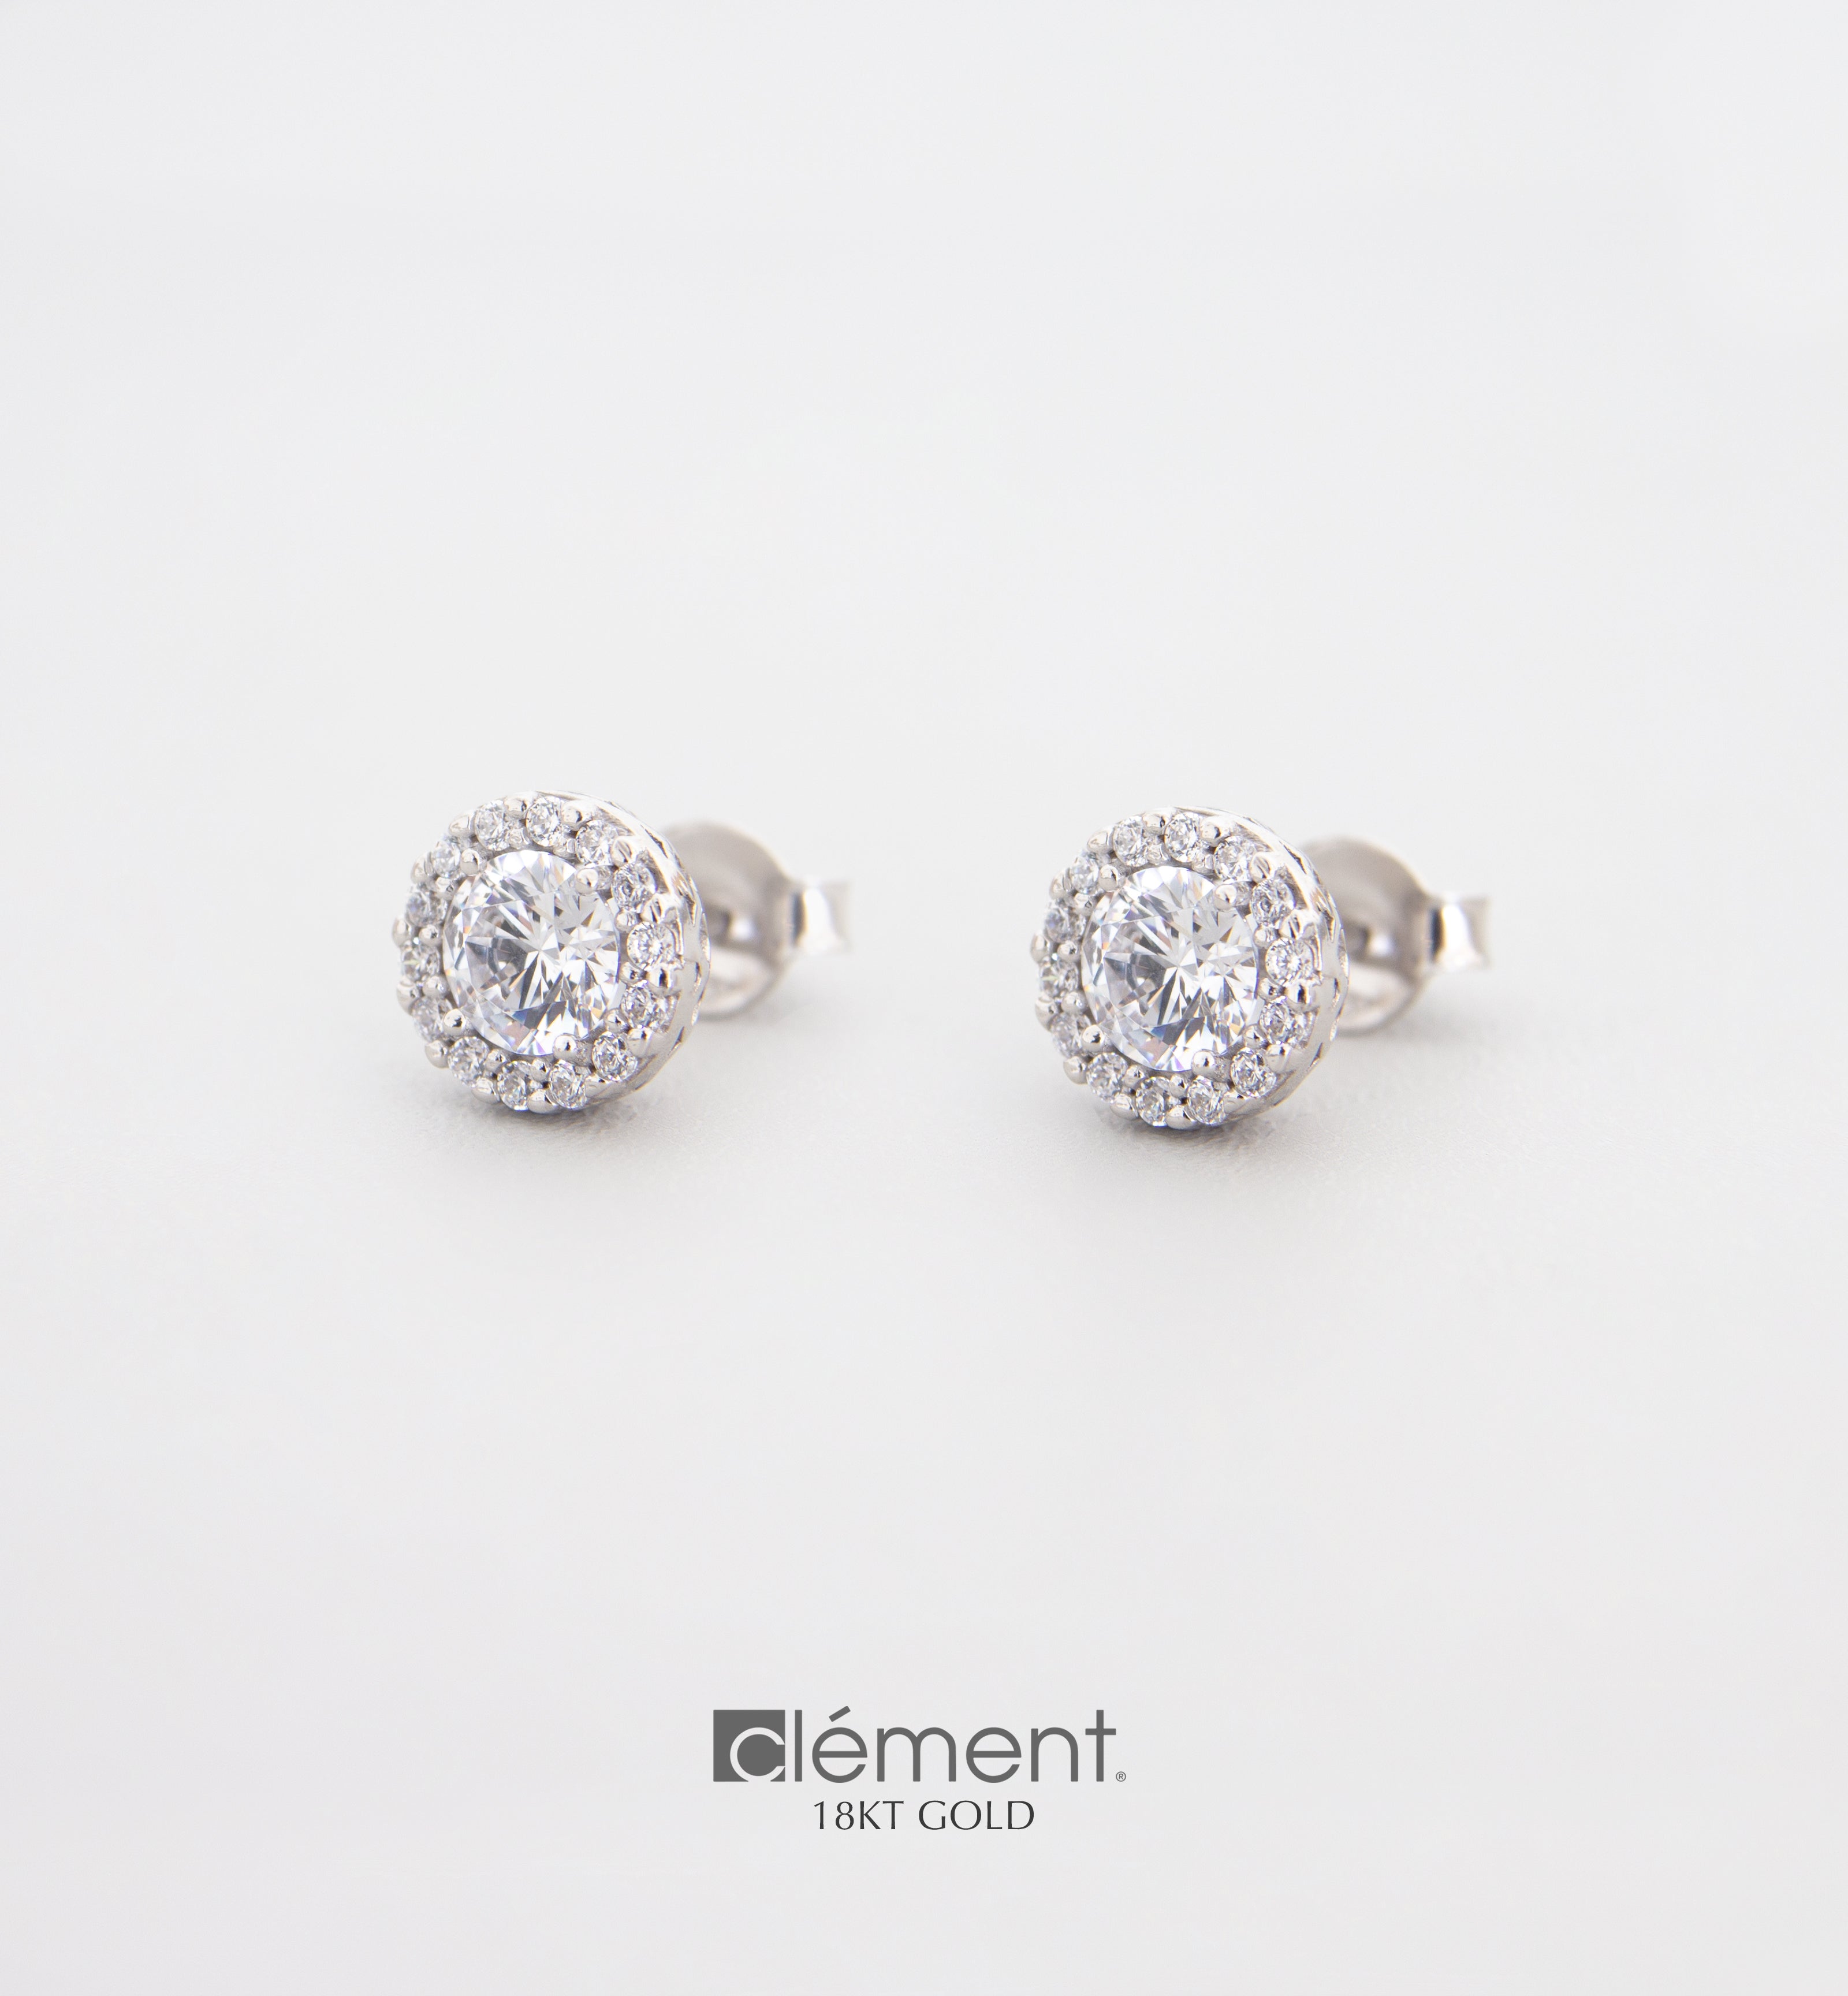 18ct White Gold Earrings with Cubic Zircon Stones